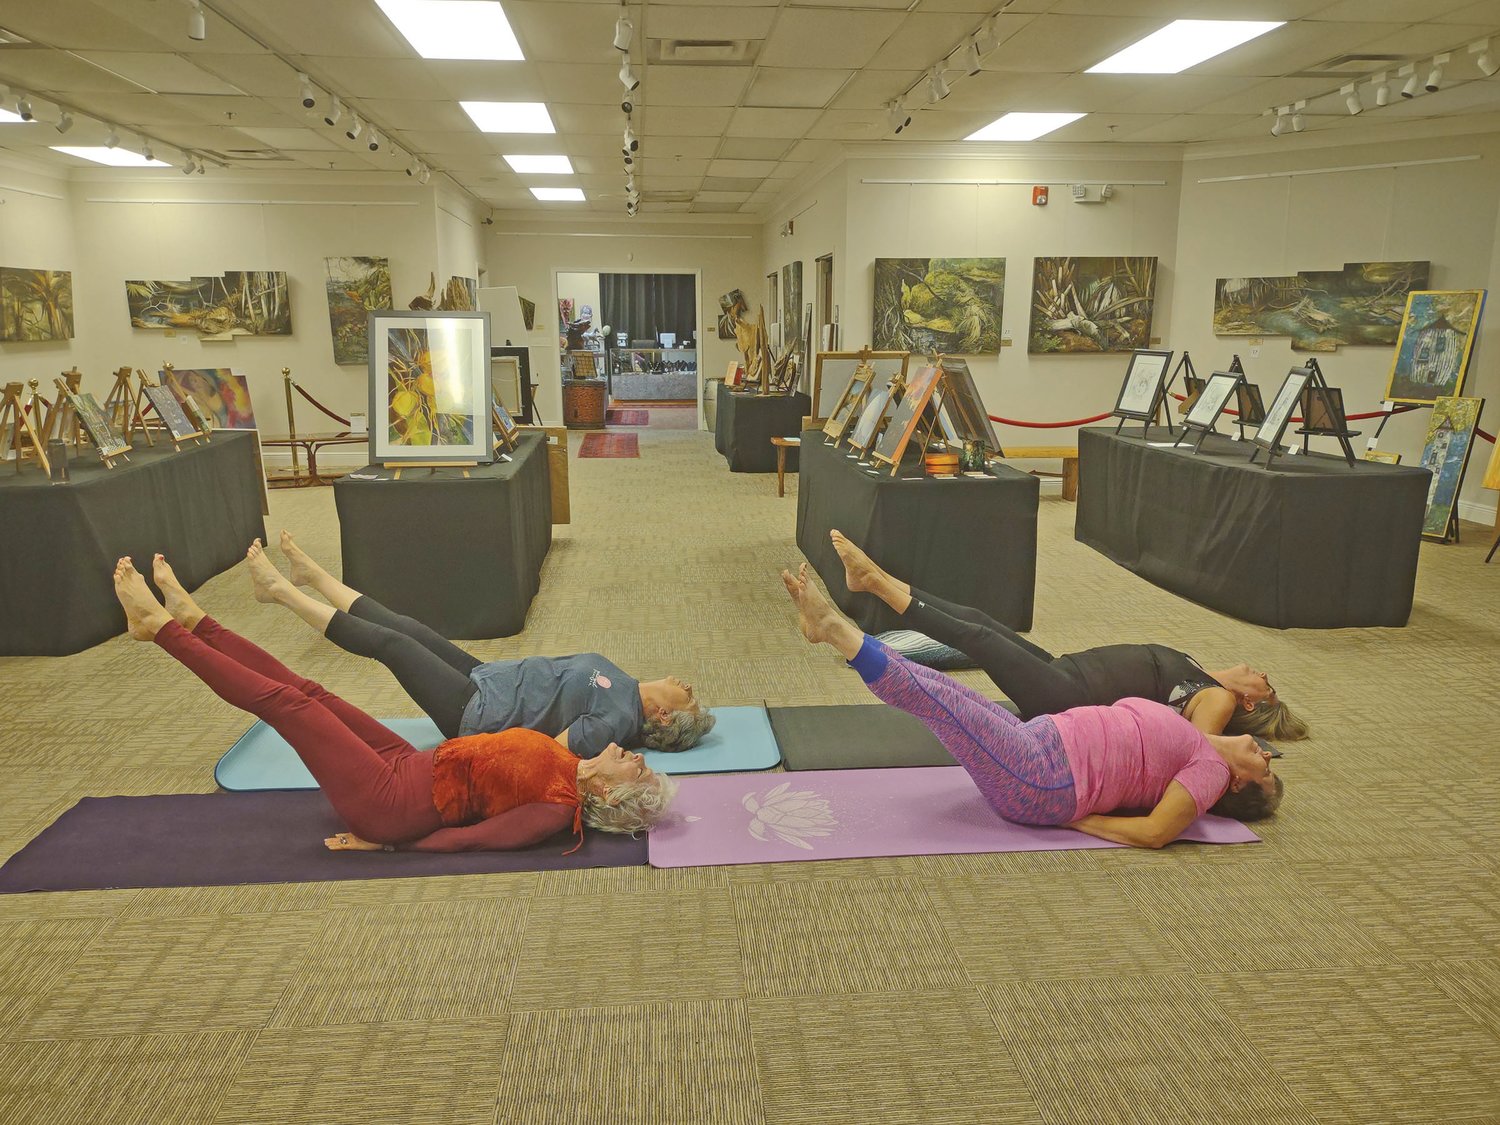 Yoga practioners - Nancy, Gaylin, Darla and Nancy Zachary - at the Peter Powell Roberts Museum demonstrate “Fish Pose.”